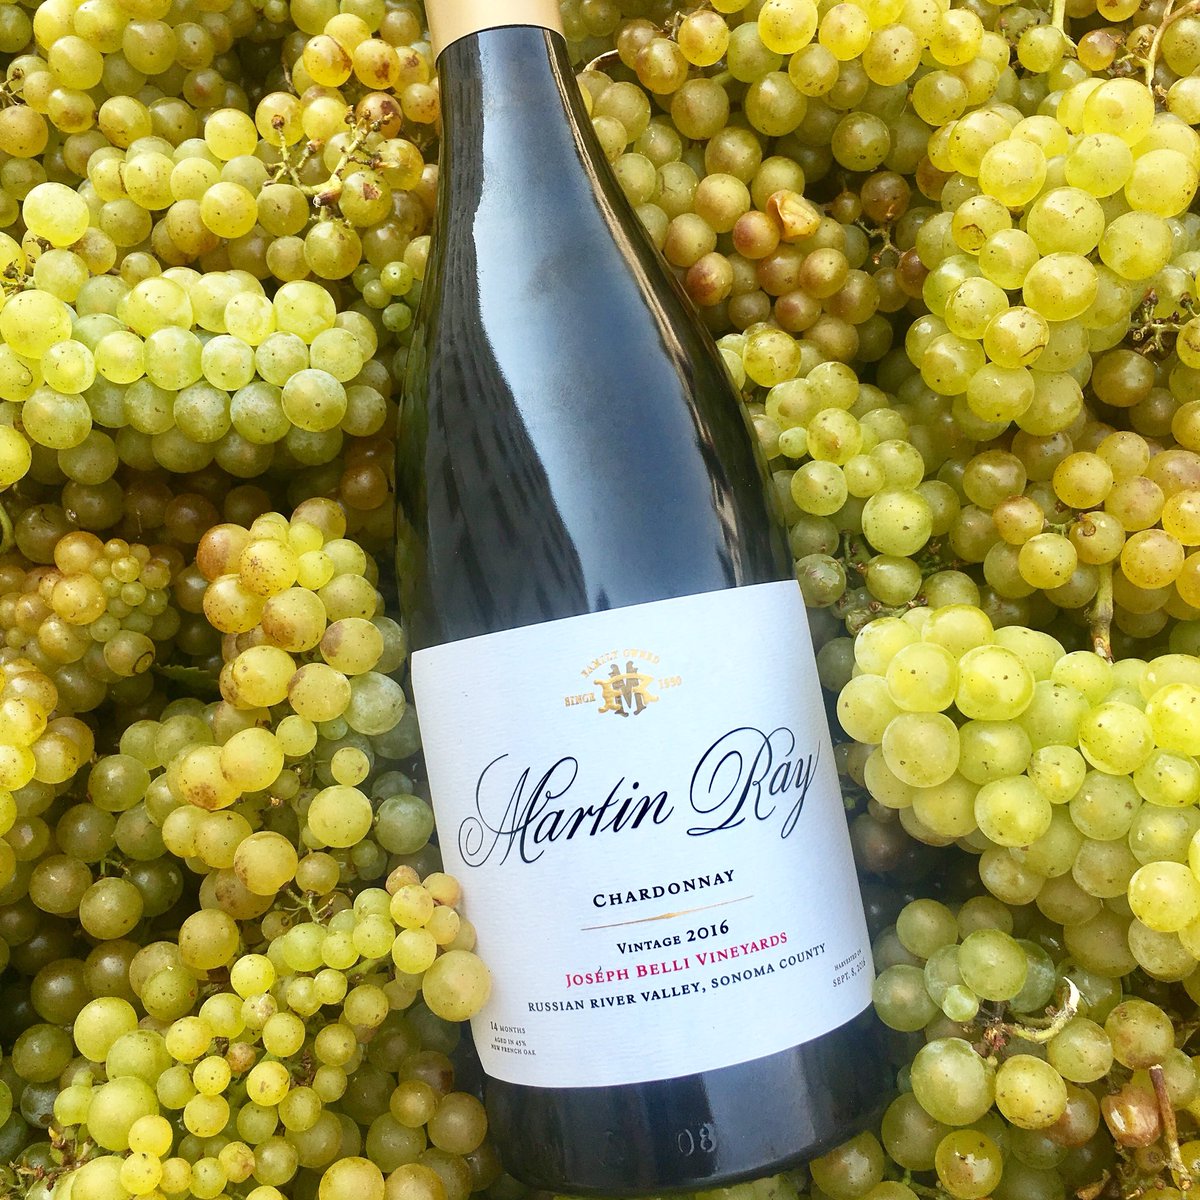 #Cheers to #NationalChardonnayDay! To all those that love this varietal, we hope you’ve popped a bottle of your fave. Currently loving our Jo. Belli, #organicallyfarmed, it’s quintessential #russianriver and so #vibrant and #lucious.